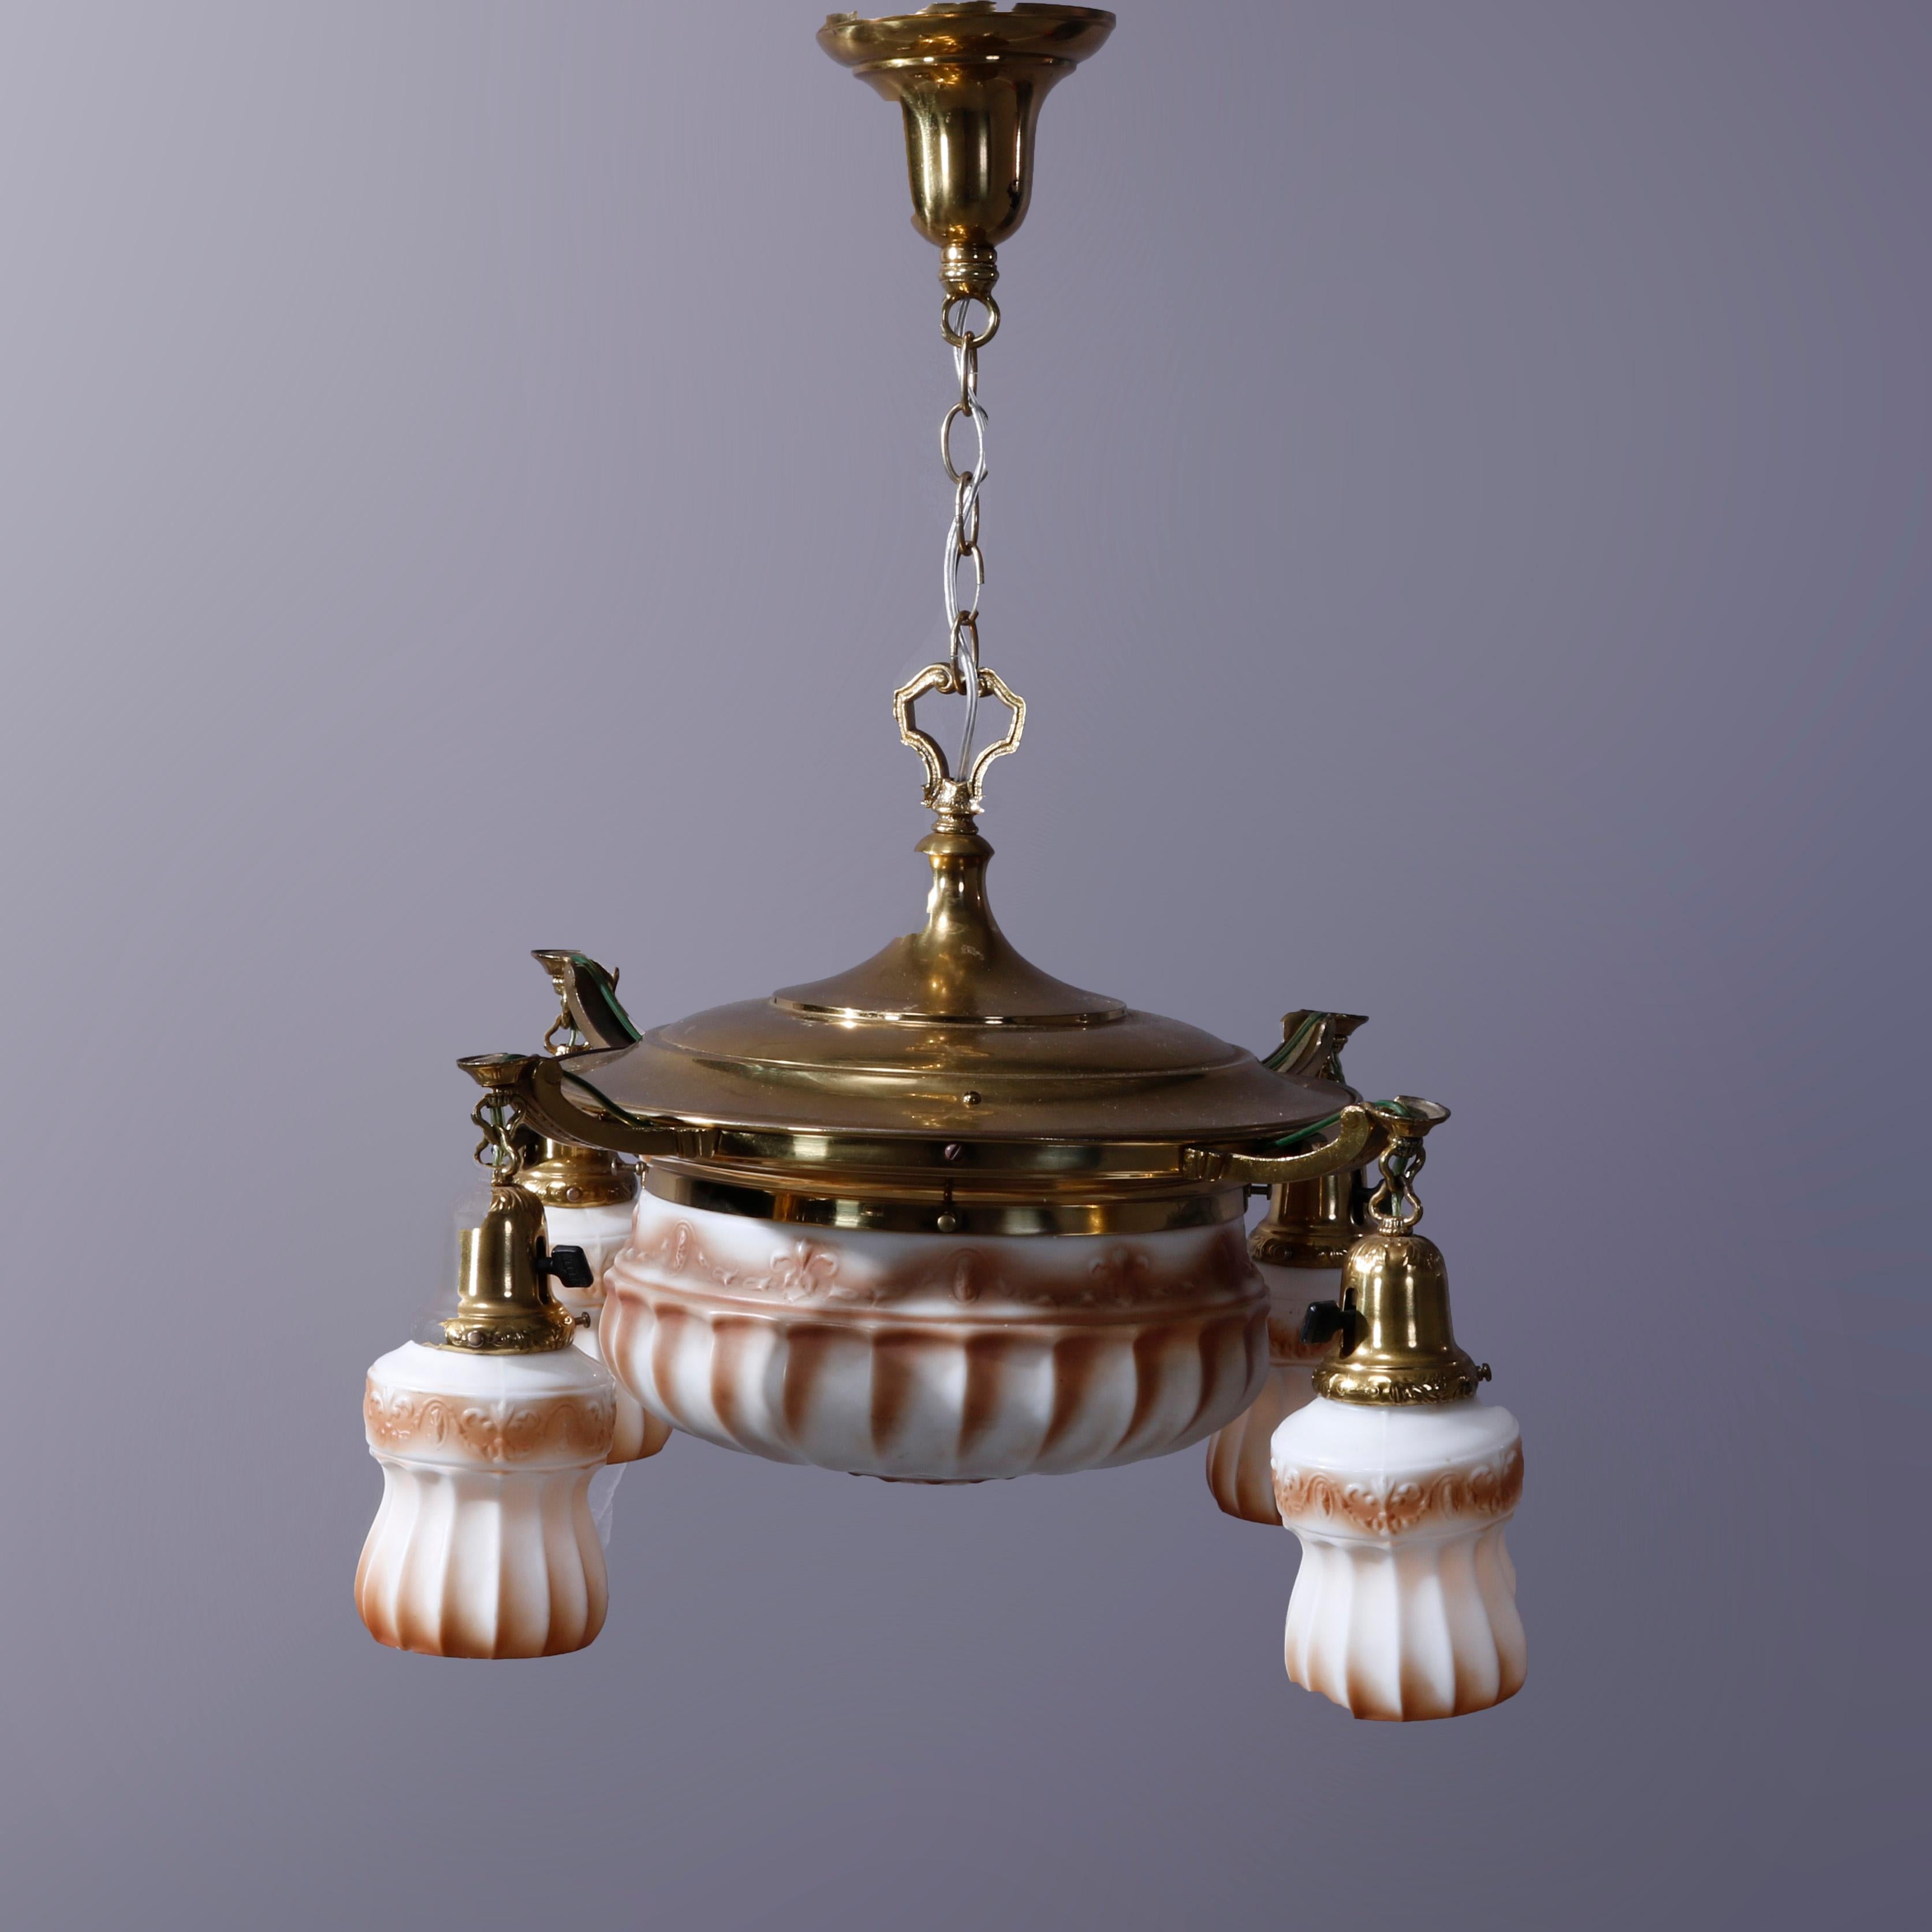 An antique Victorian ceiling fixture offers brass frame with central dome pan light and four drop-lights having glass shades, c1920

Measures - 33''h x 23''w x 23''d; 7'' chain.

Catalogue Note: Ask about DISCOUNTED DELIVERY RATES available to most